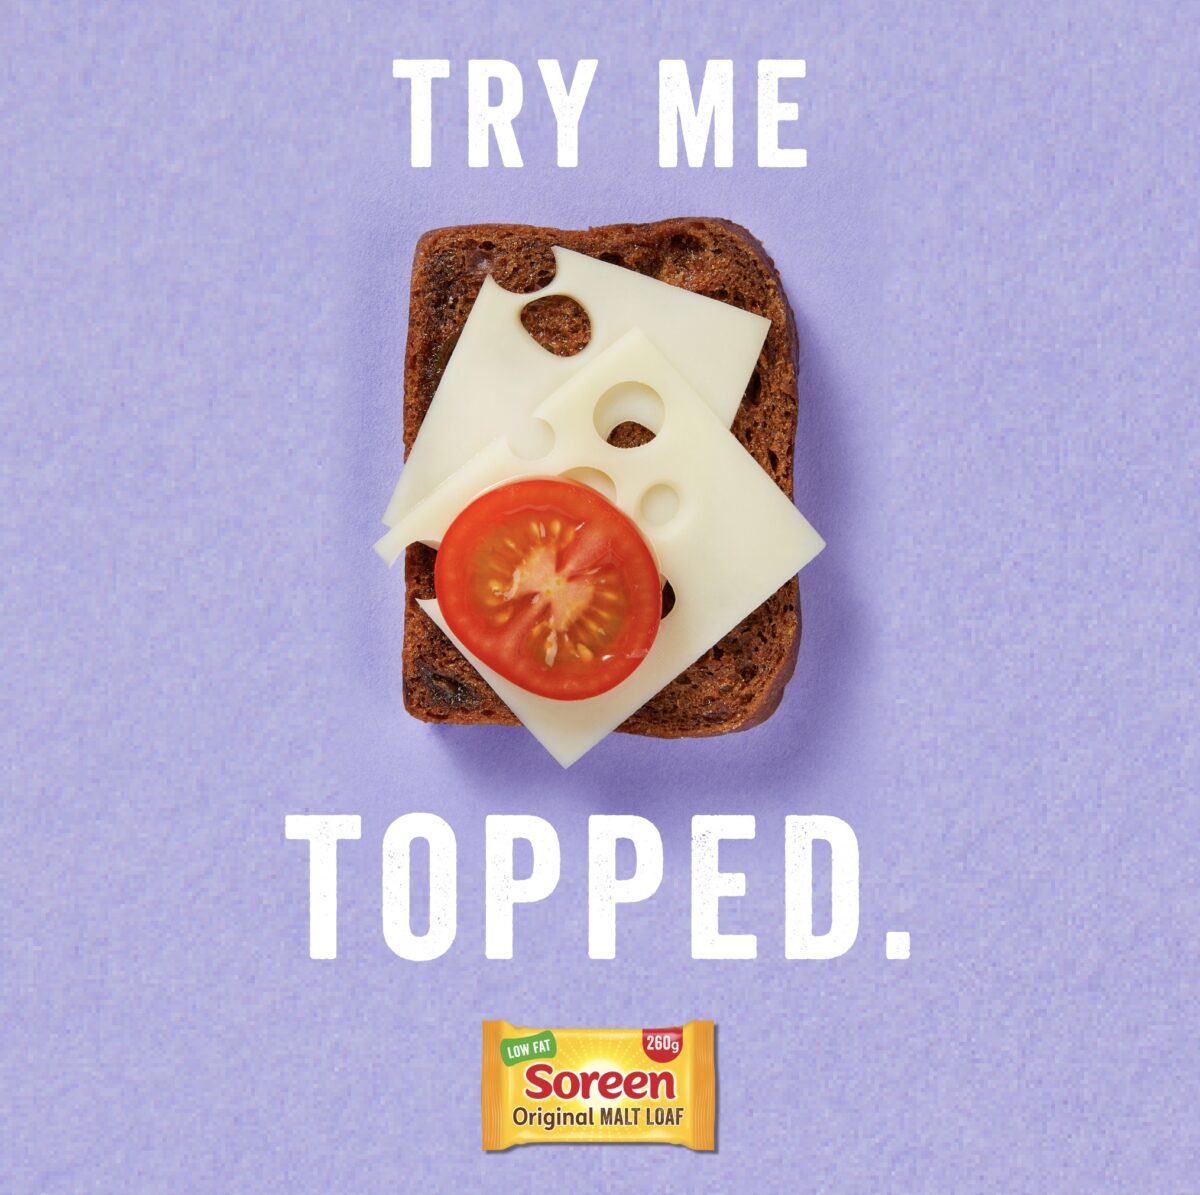 British malt loaf brand Soreen has today unveiled a new campaign leaning its fans' imagination with an ad encouraging consumers to try it "topped", depicted here with a purple background - showing Malt bread topped with cheese and a single tomato slice